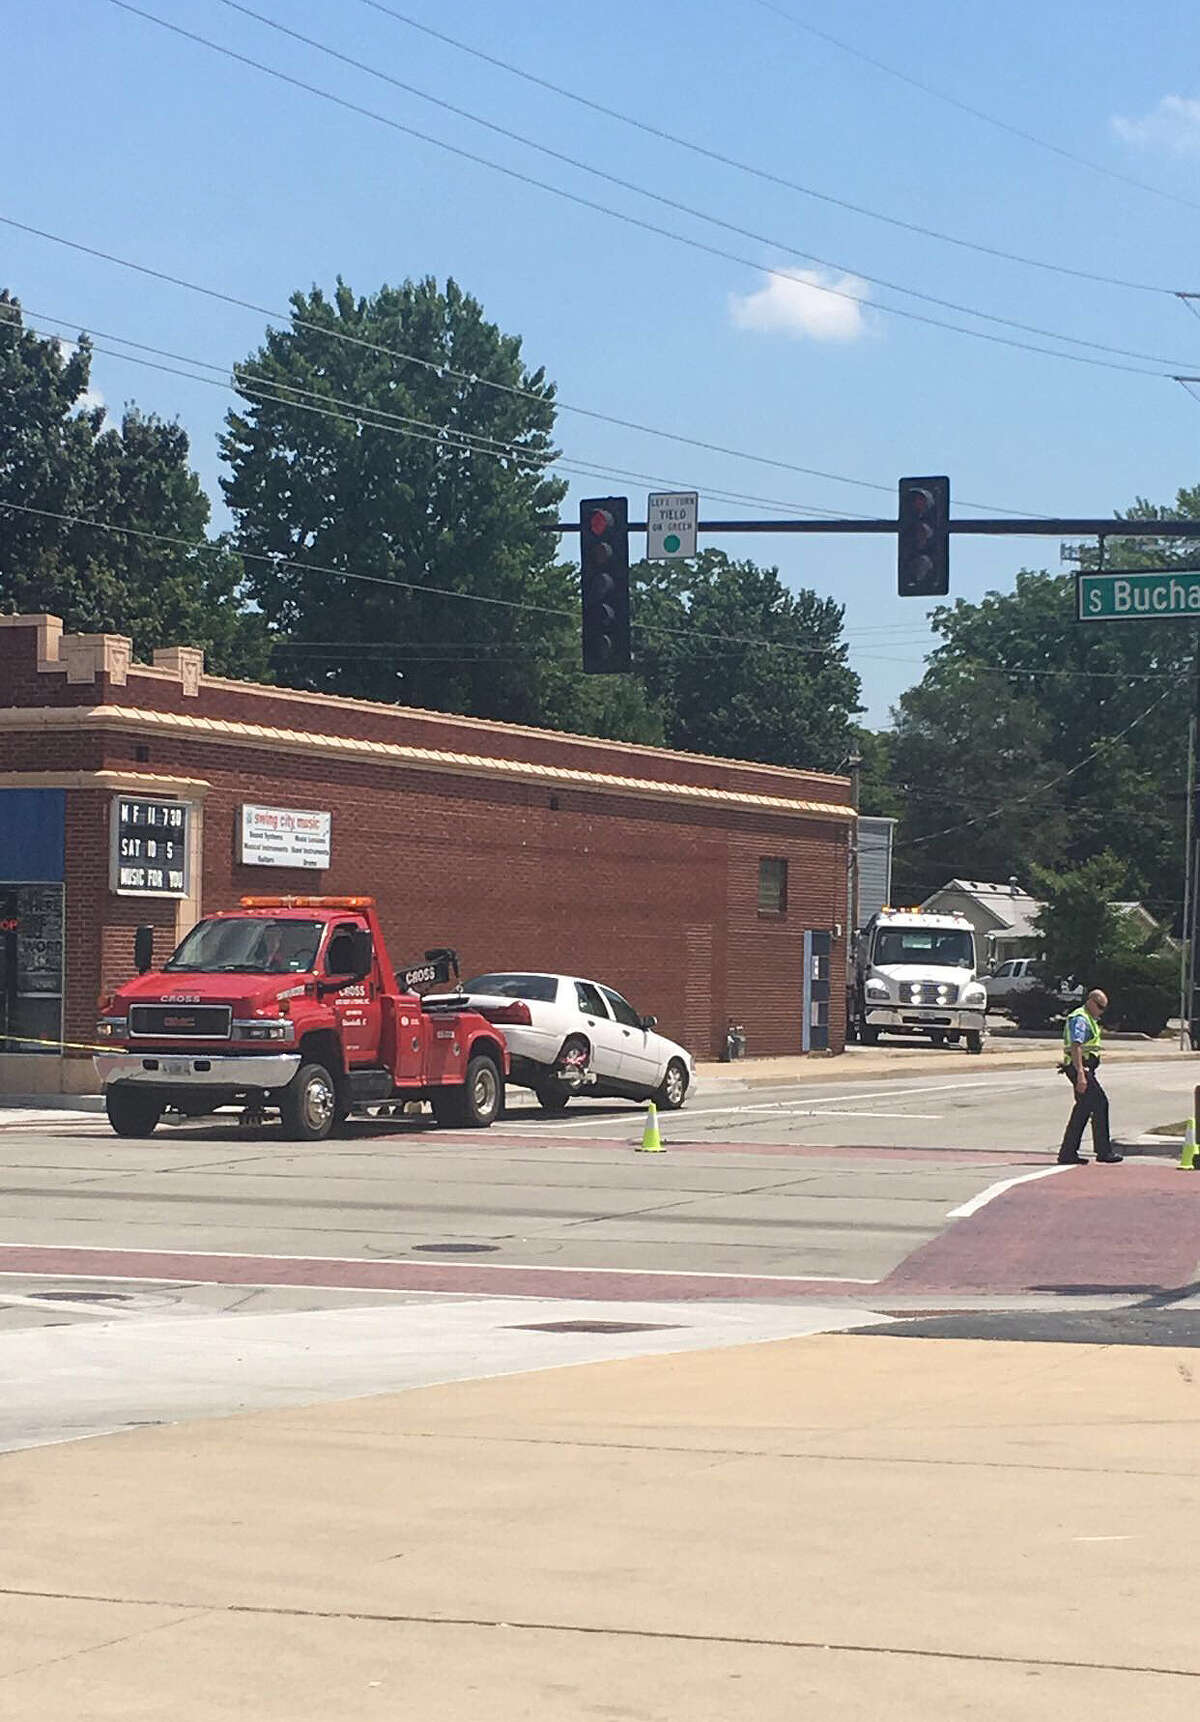 Two vehicles were involved in a collision early Monday afternoon, damaging a streetlight at the intersection of East Schwarz Street and South Buchanan Street.